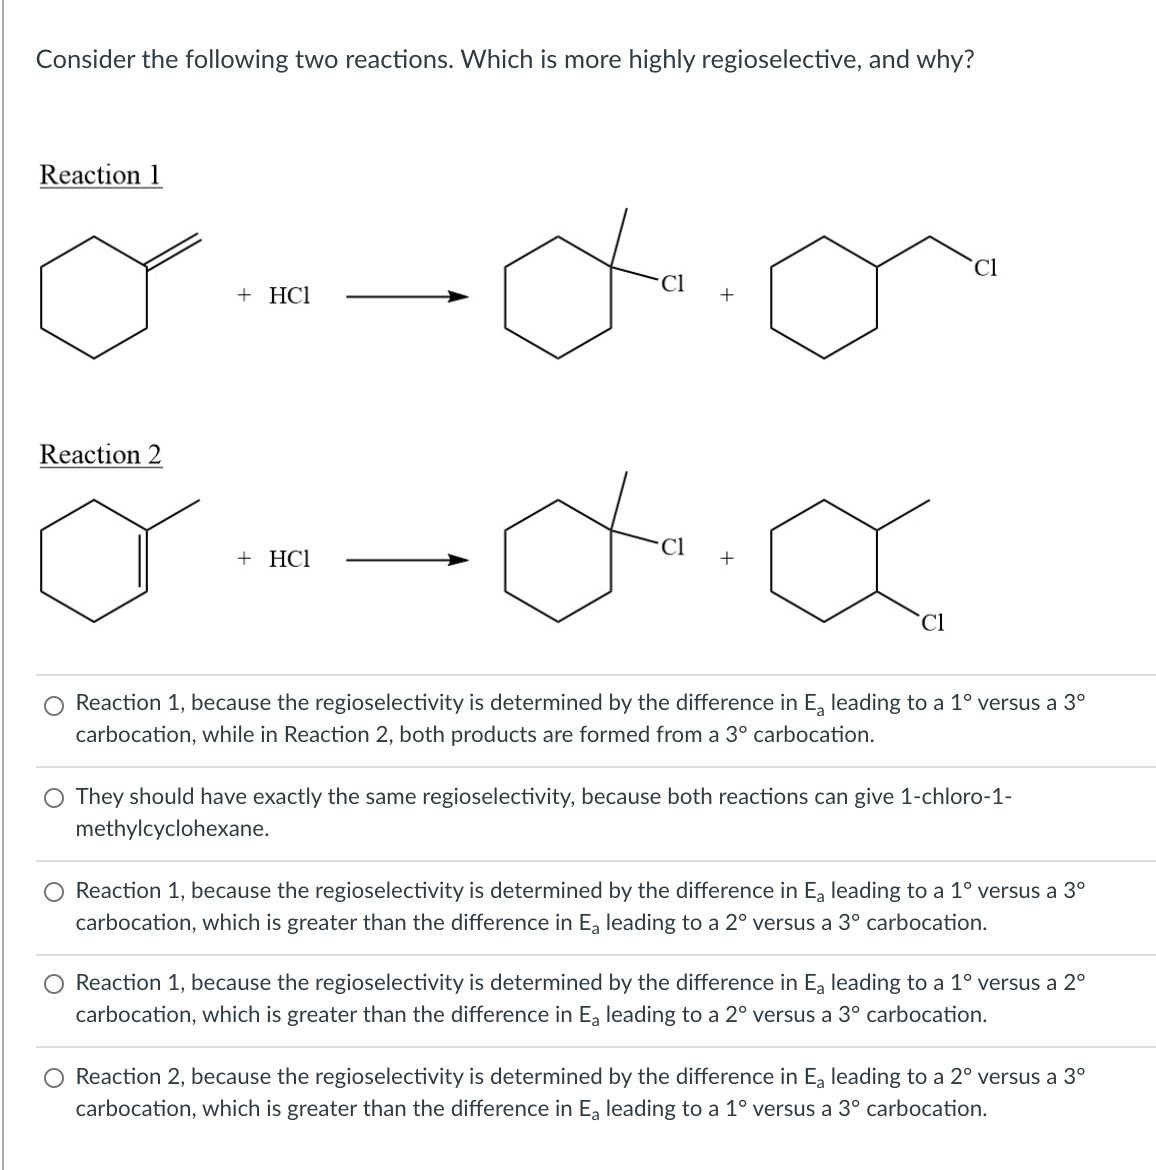 Consider the following two reactions. Which is more highly regioselective, and why?
Reaction 1
`Cl
+ HCl
Reaction 2
+ HCl
`Cl
Reaction 1, because the regioselectivity is determined by the difference in E, leading to a 1° versus a 3°
carbocation, while in Reaction 2, both products are formed from a 3° carbocation.
O They should have exactly the same regioselectivity, because both reactions can give 1-chloro-1-
methylcyclohexane.
Reaction 1, because the regioselectivity is determined by the difference in Ea leading to a 1° versus a 3°
carbocation, which is greater than the difference in Ea leading to a 2° versus a 3° carbocation.
Reaction 1, because the regioselectivity is determined by the difference in Ea leading to a 1° versus a 2°
carbocation, which is greater than the difference in Ea leading to a 2° versus a 3° carbocation.
O Reaction 2, because the regioselectivity is determined by the difference in Ea leading to a 2° versus a 3°
carbocation, which is greater than the difference in E, leading to a 1° versus a 3° carbocation.
